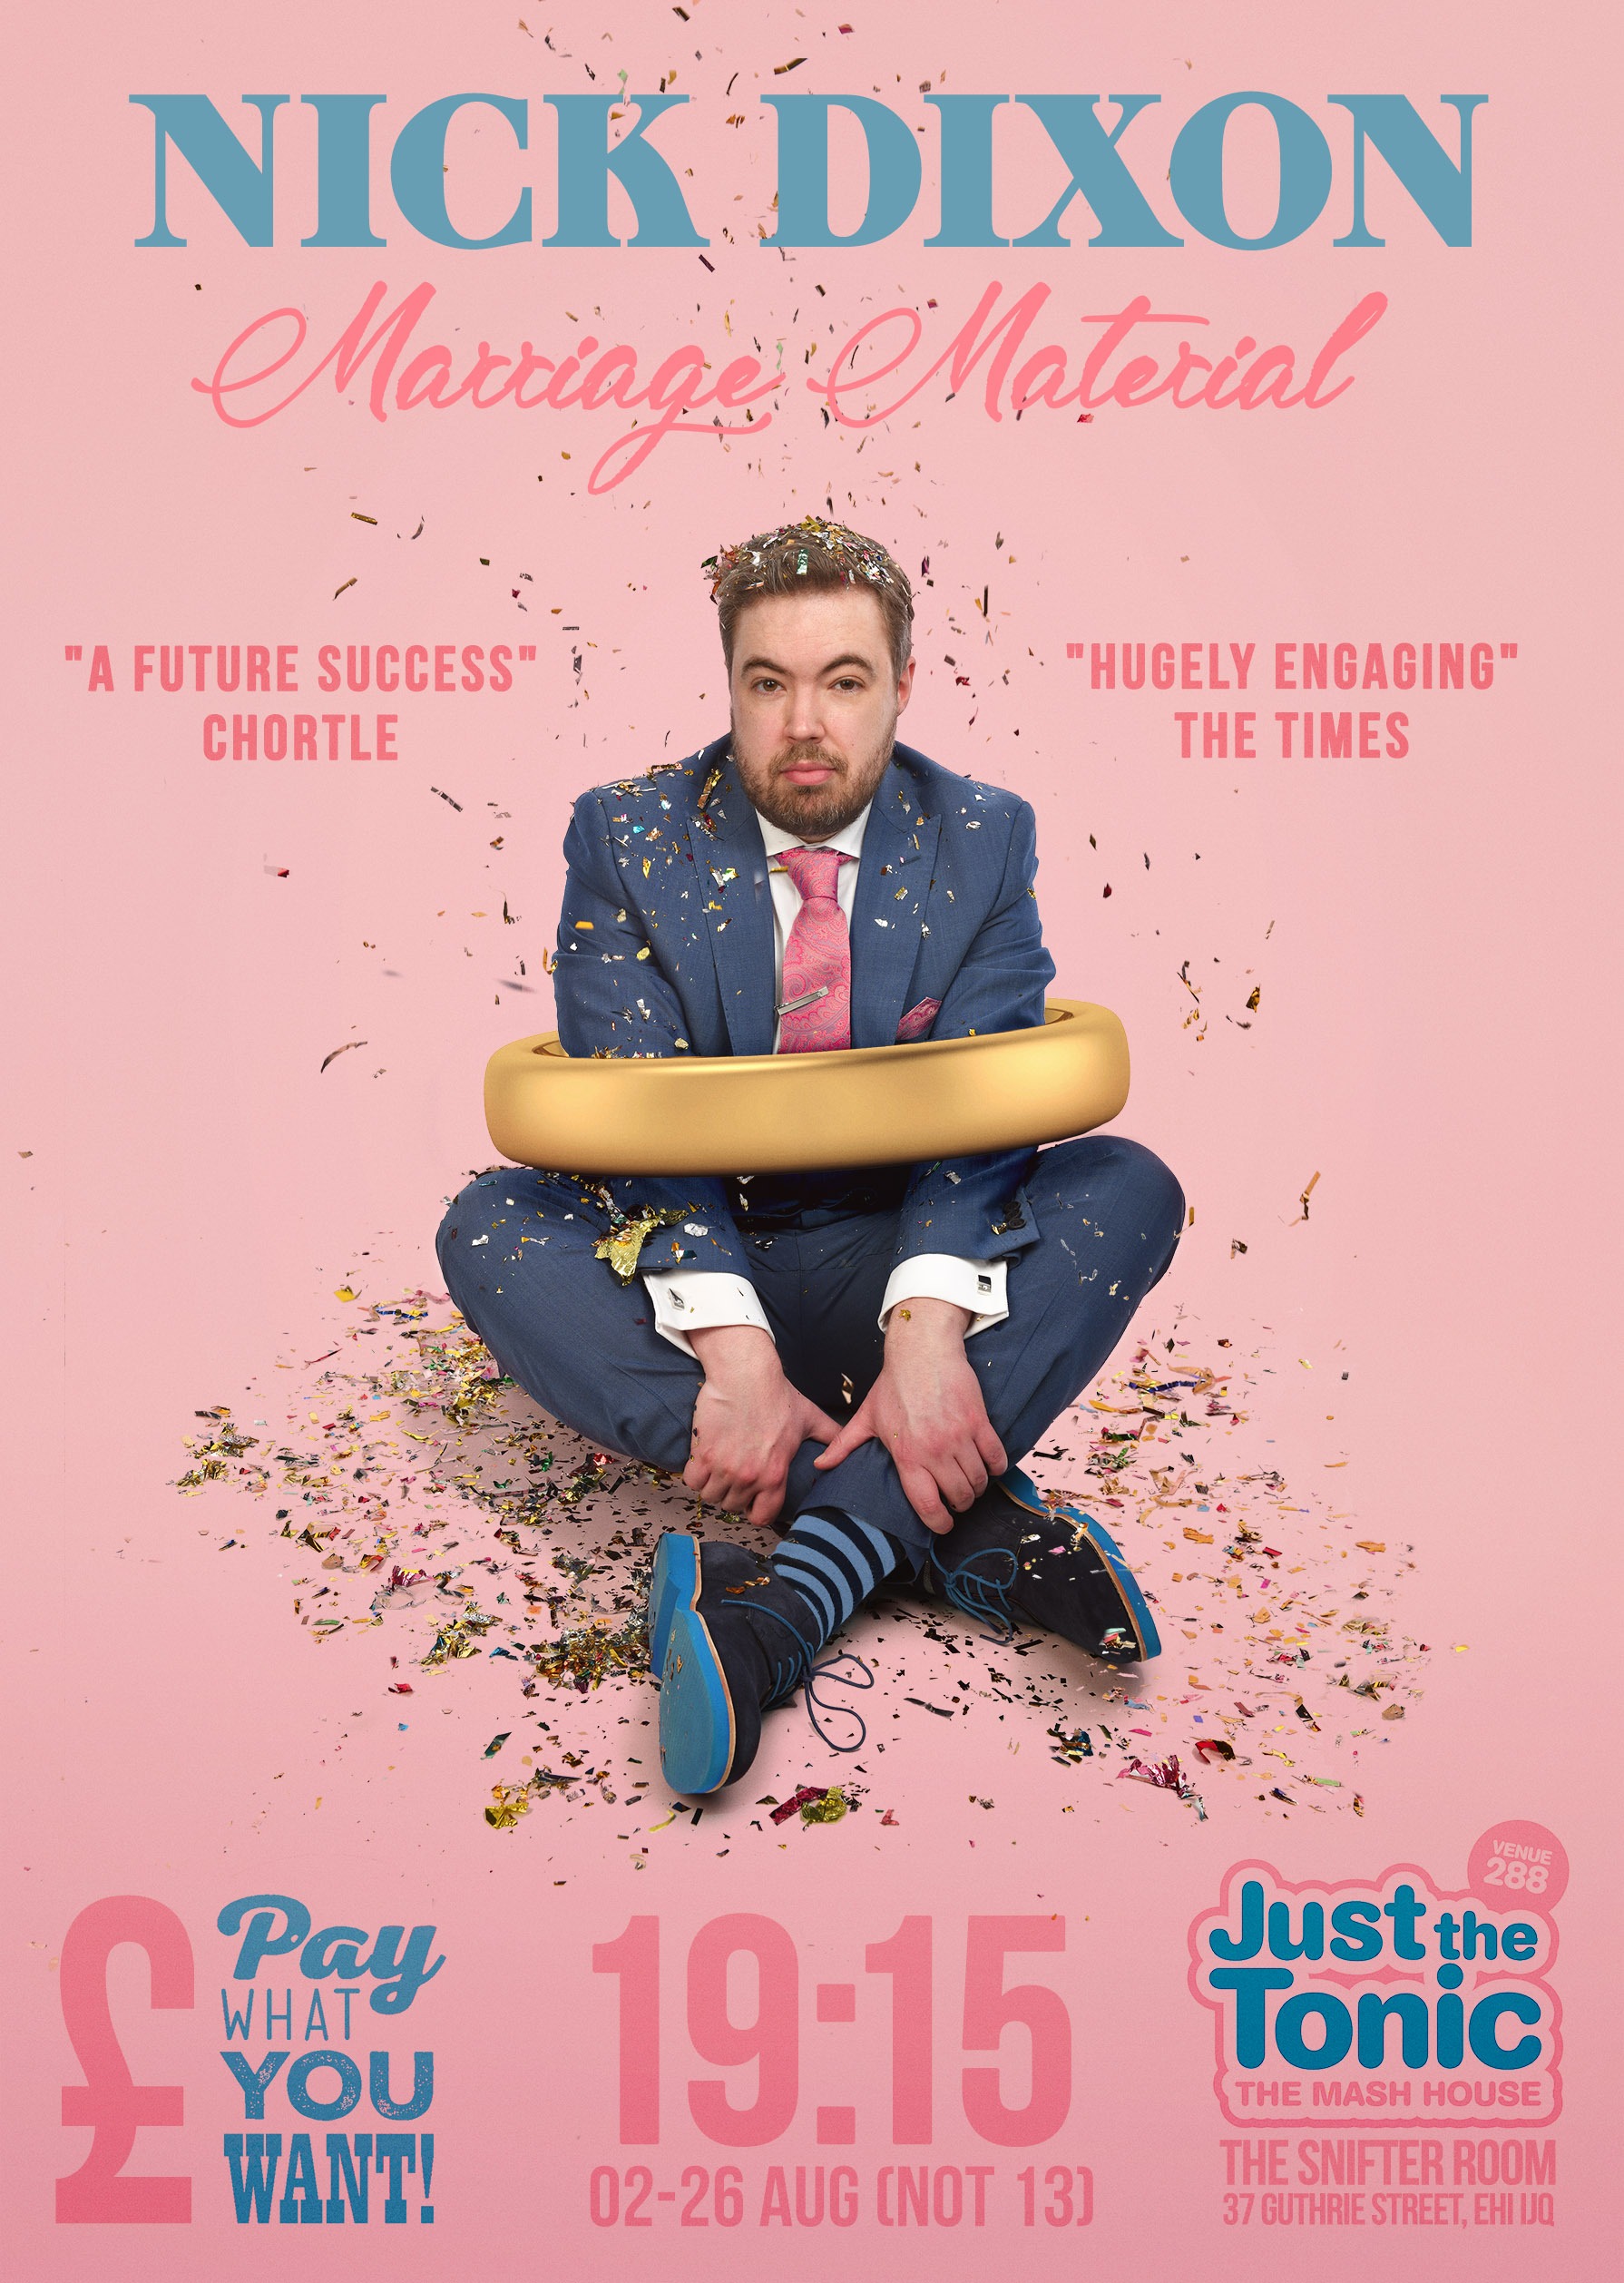 The poster for Nick Dixon: Marriage Material